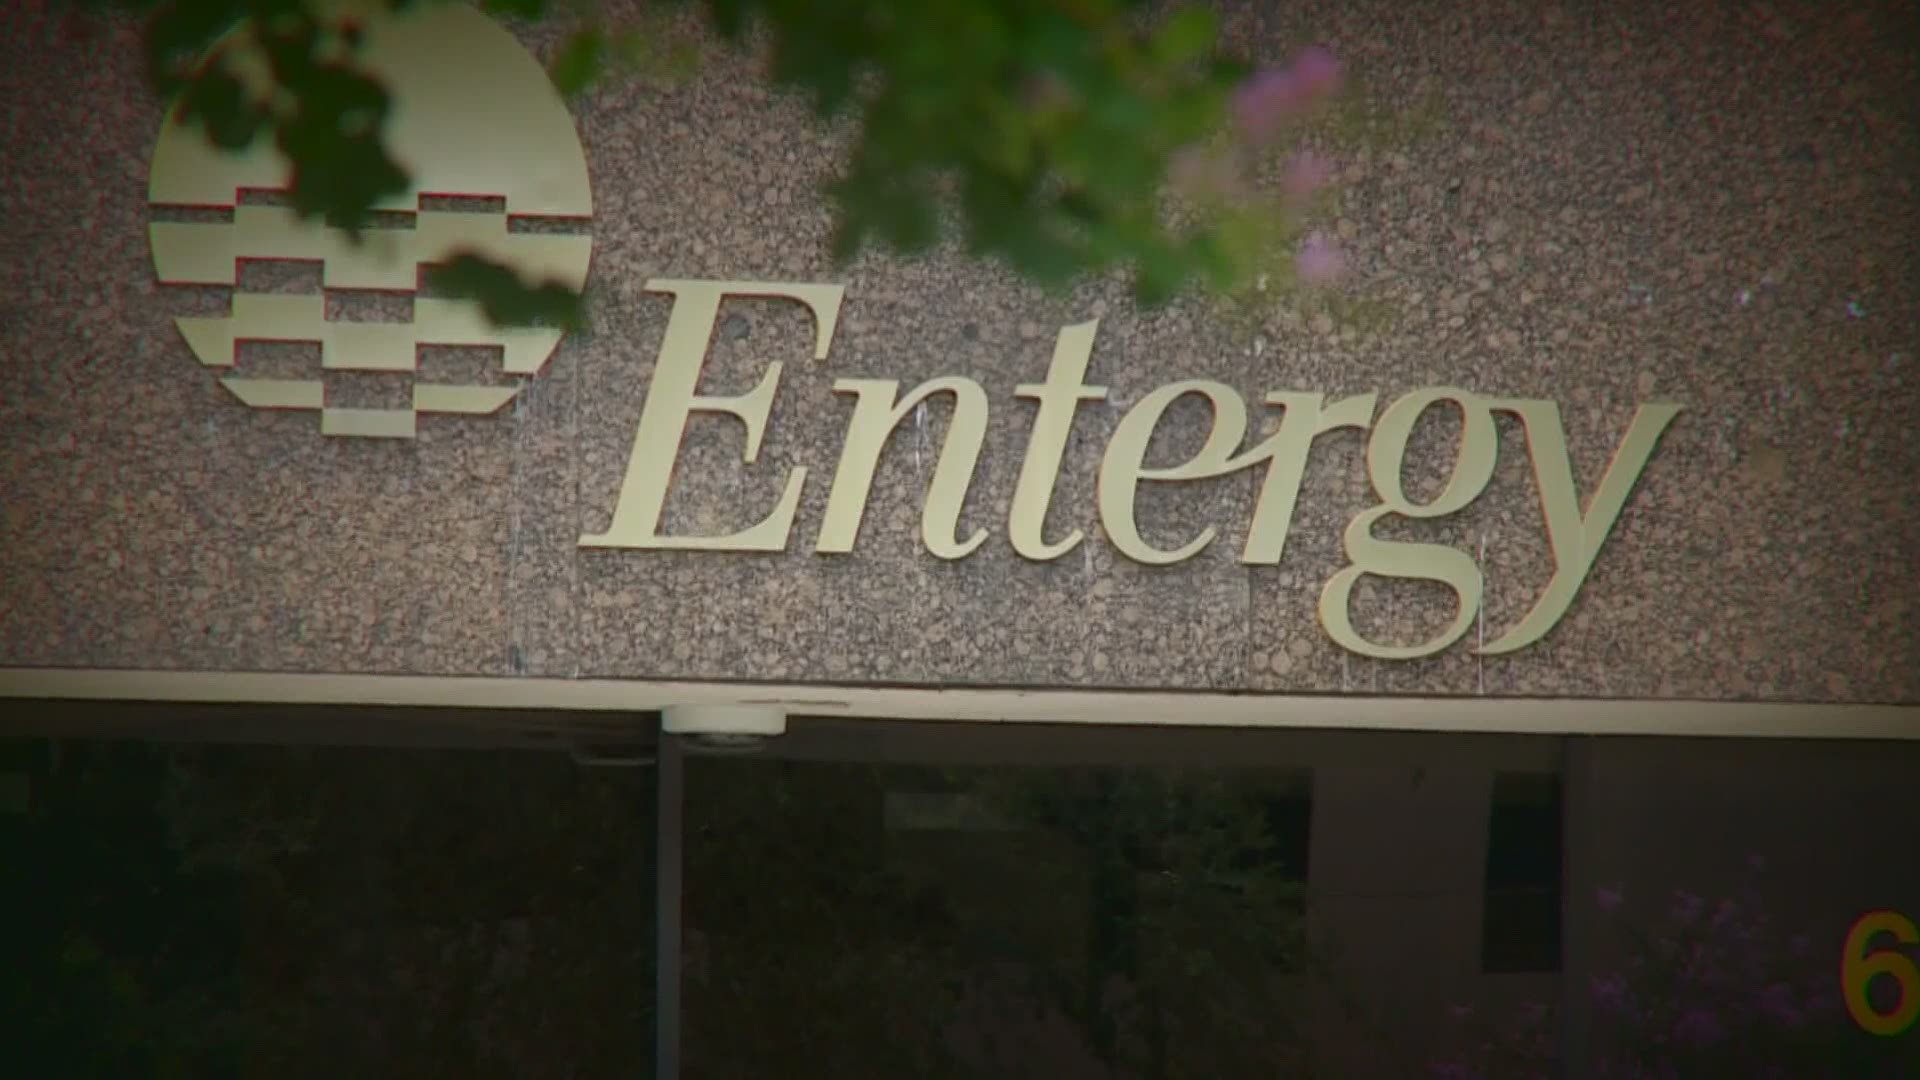 More Entergy customers are receiving scams calls claiming they owe money and they are concerned because the callers have their personal information.